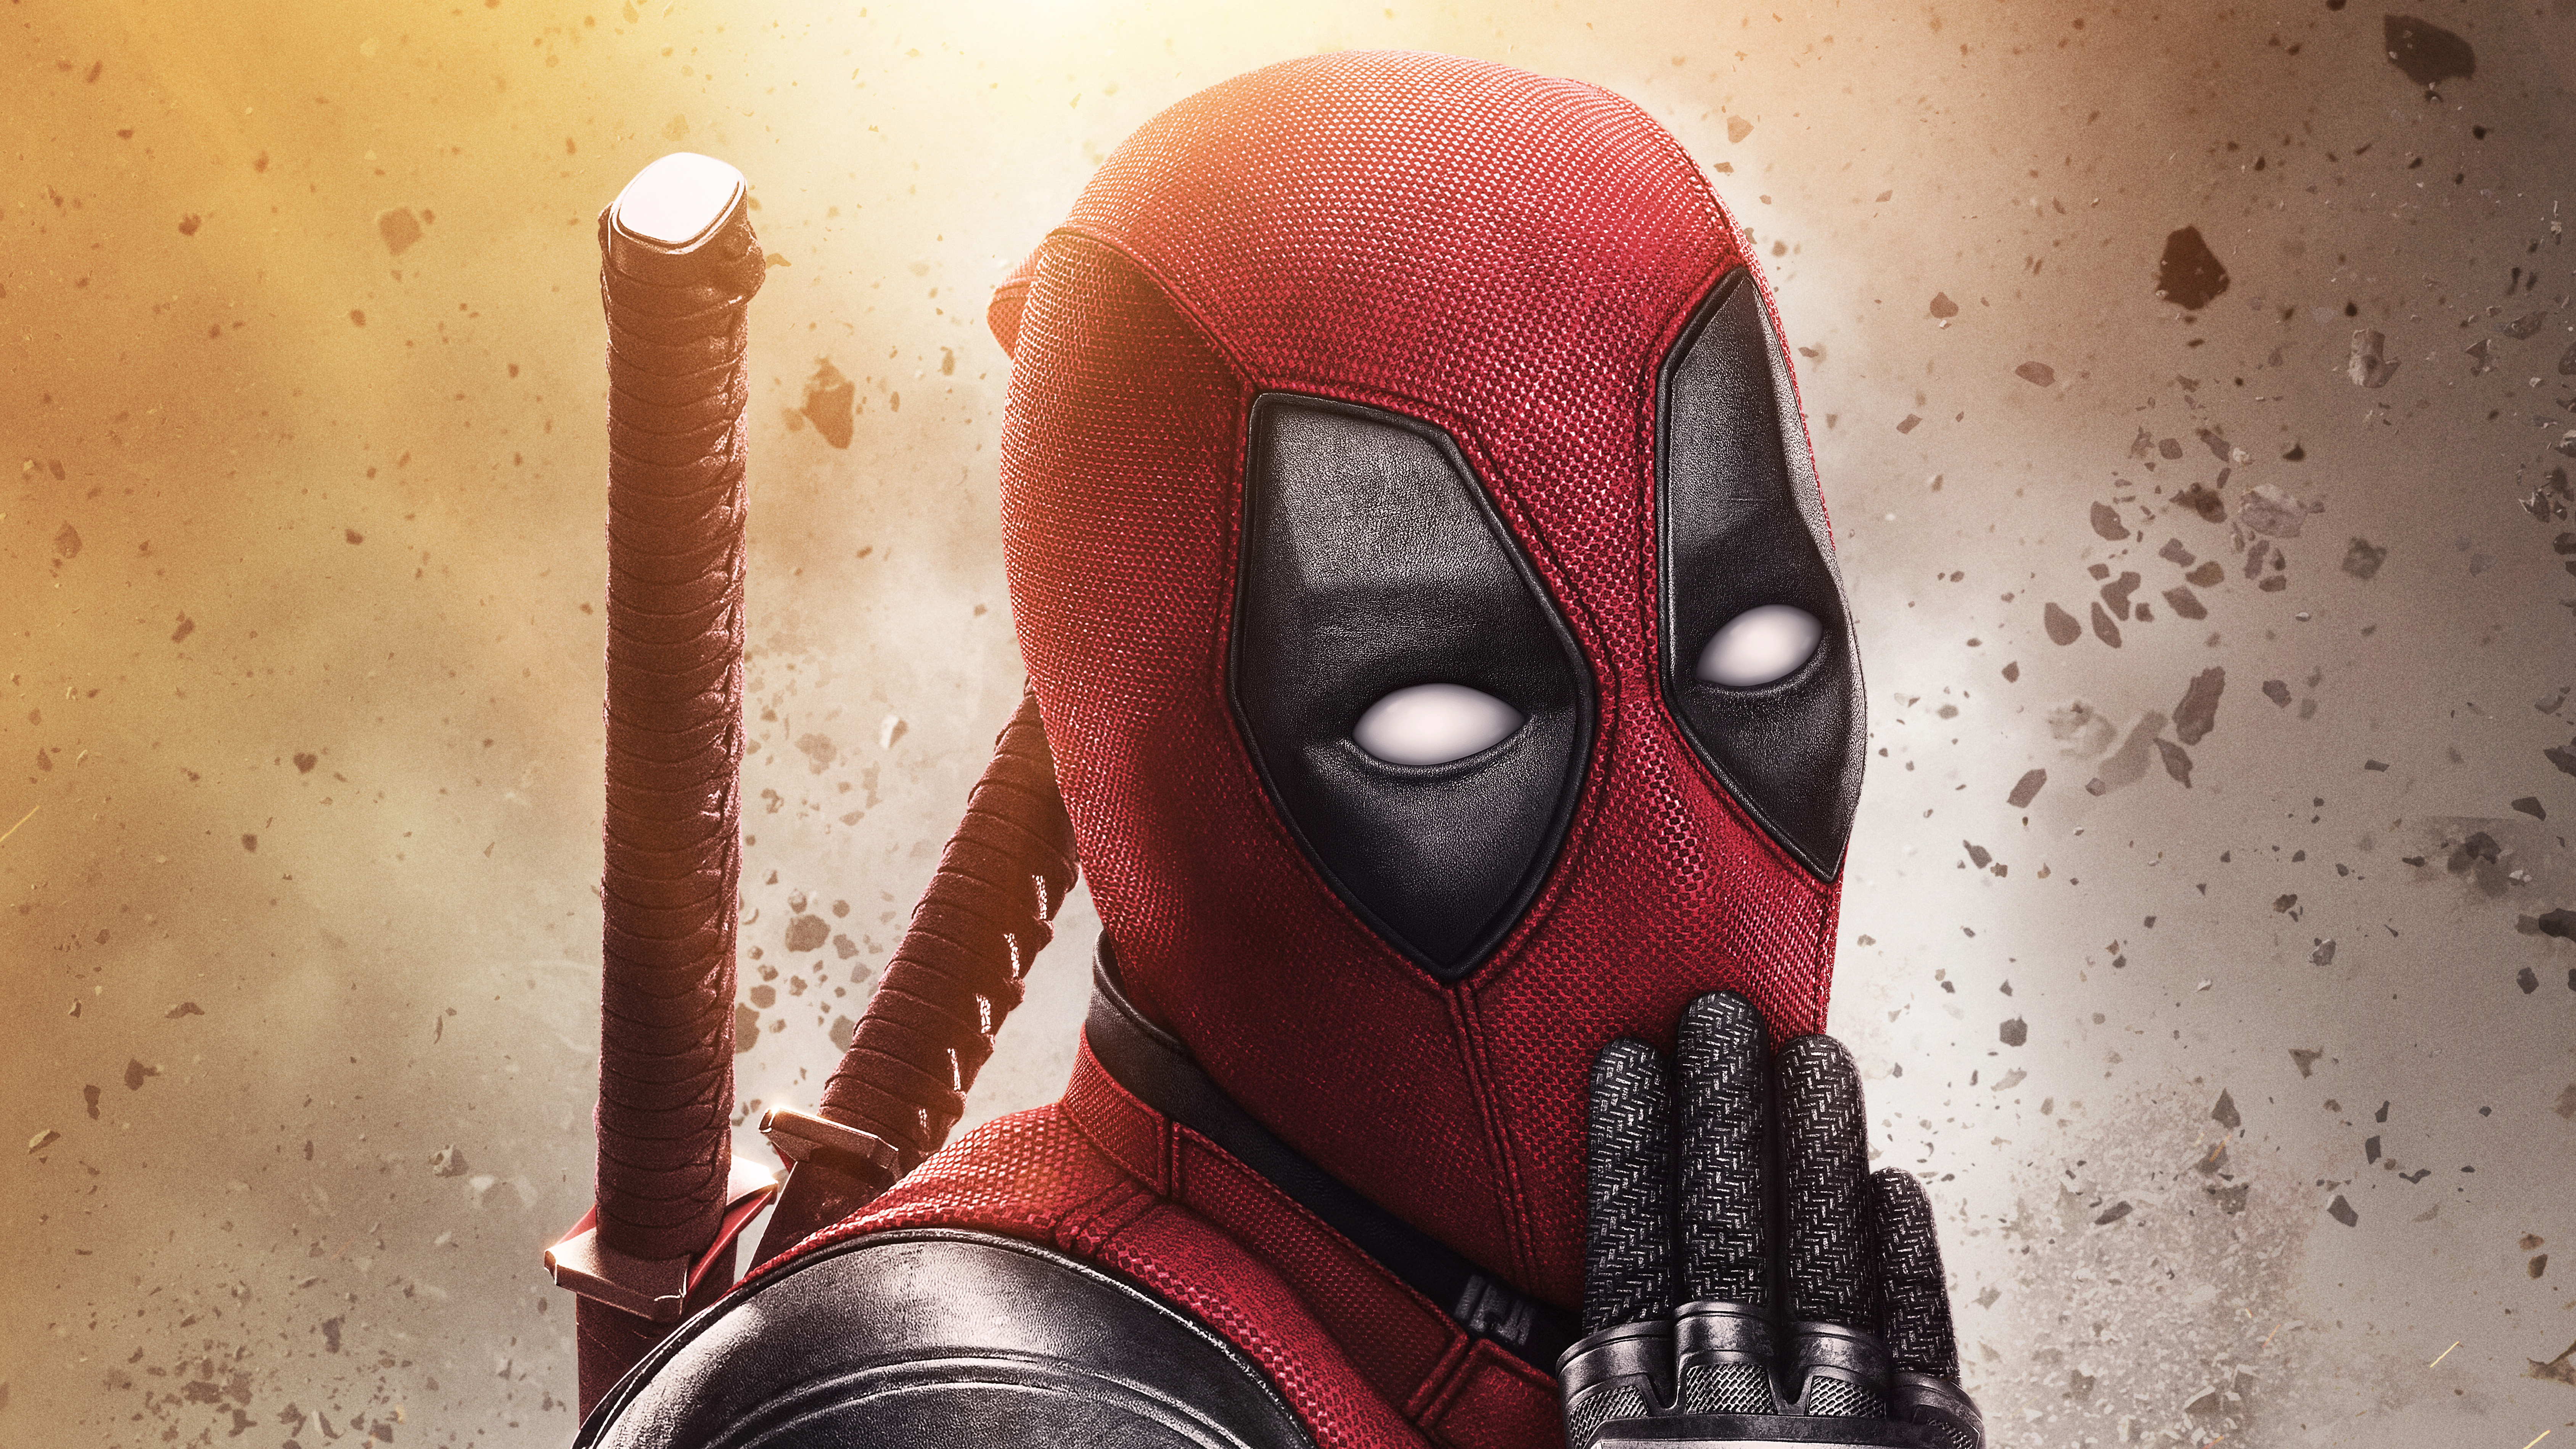 Deadpool 2 5k New Poster, HD Movies, 4k Wallpapers, Images ...